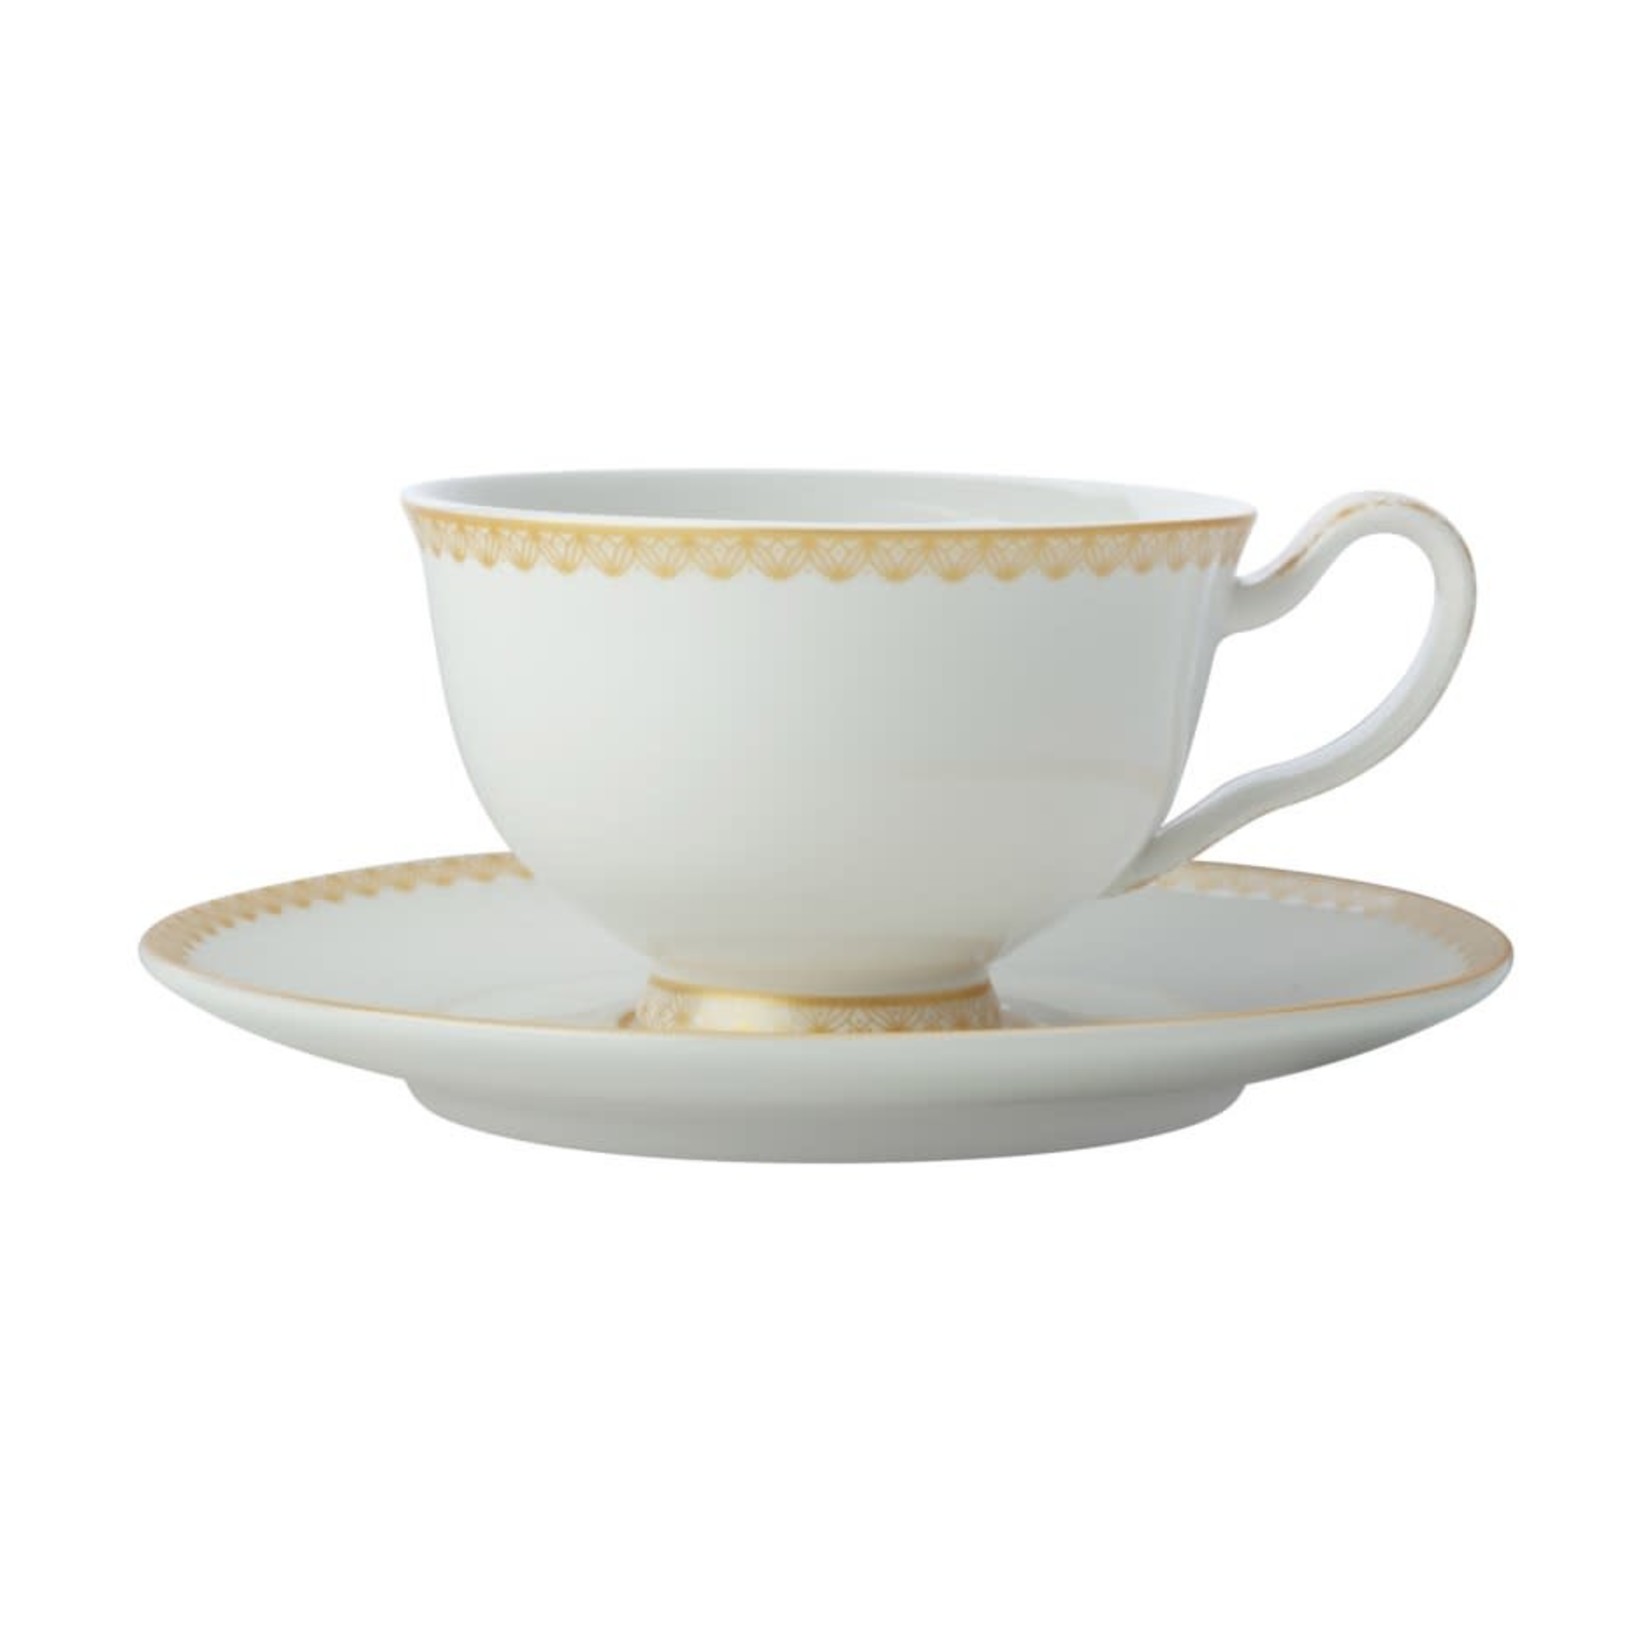 MAXWELL WILLIAMS MAXWELL WILLIAMS Classic Footed Cup & Saucer- White DNR